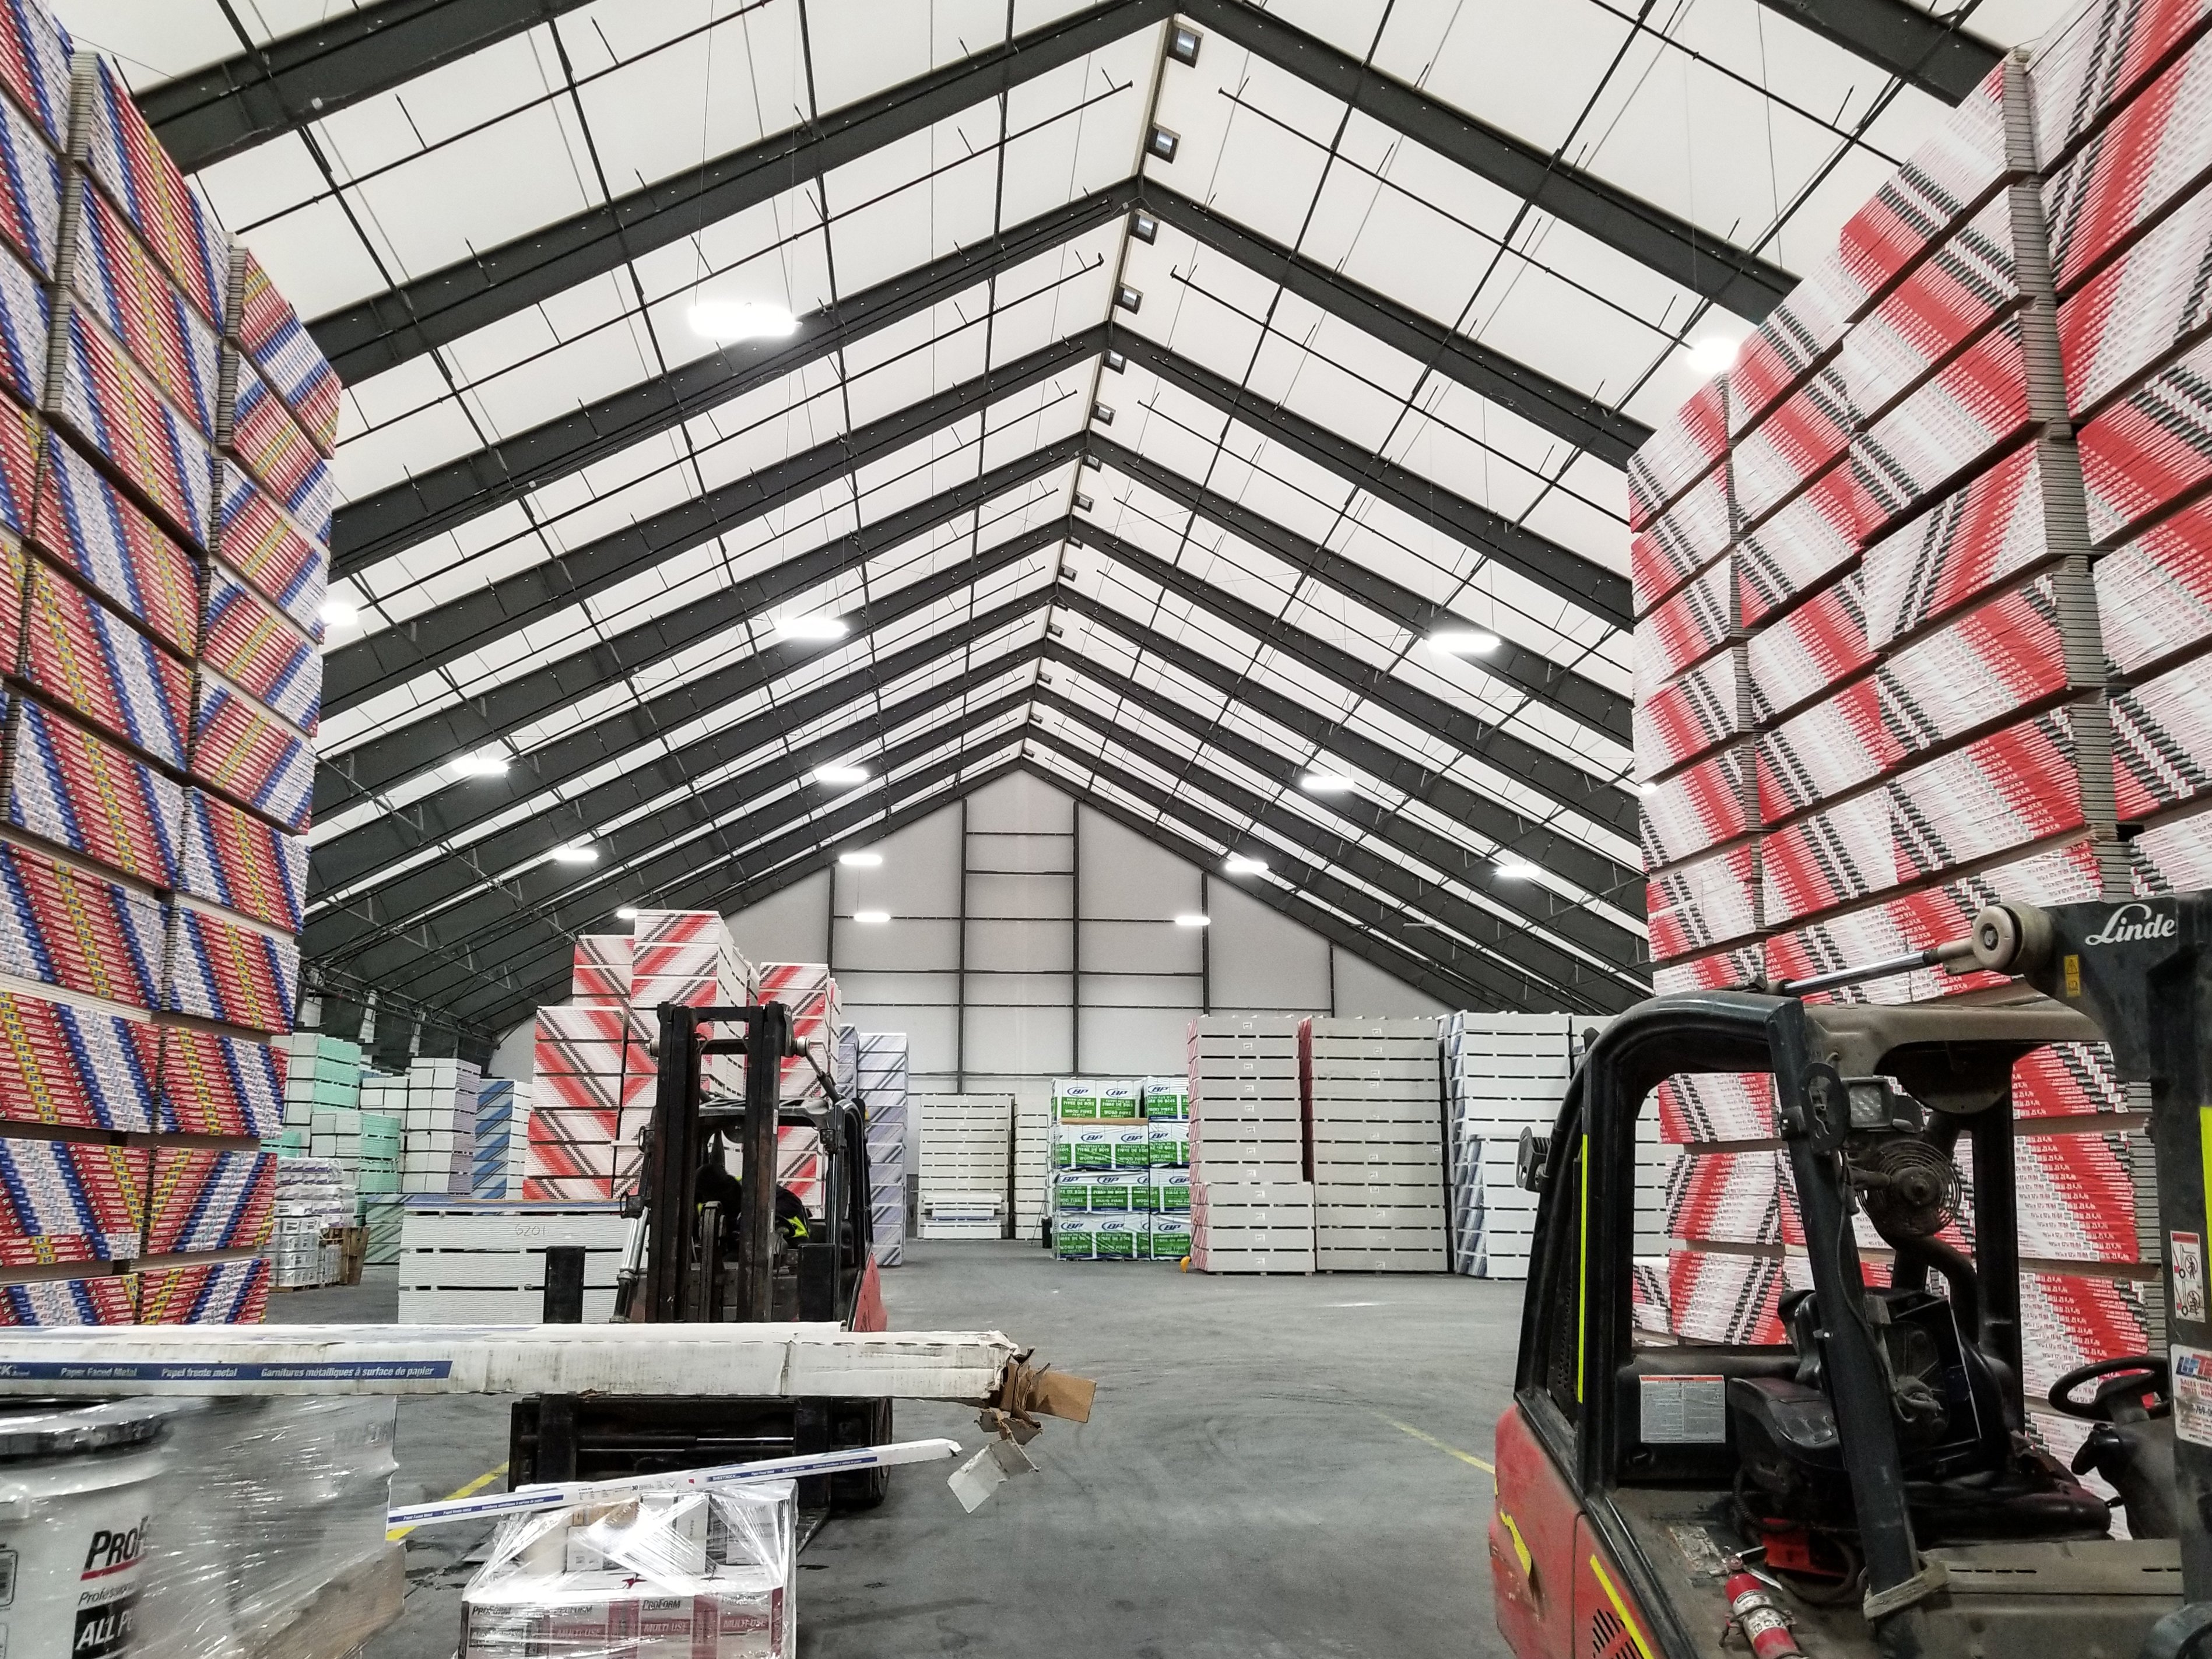 Maximizing Natural Light in a Tension Fabric Building